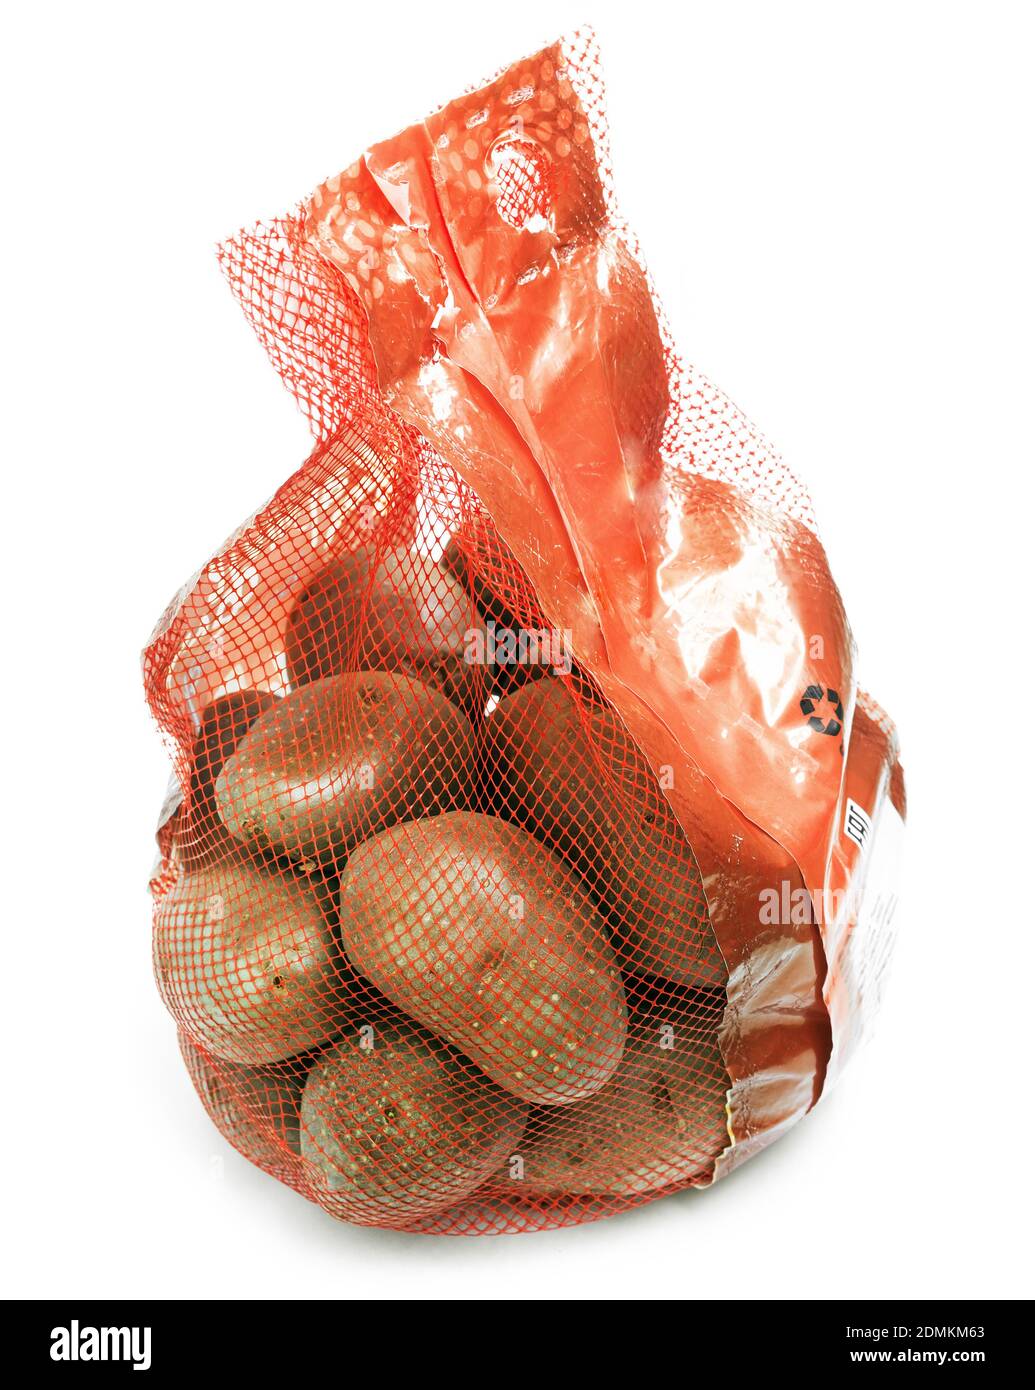 grocery pack of fresh potato, isolated Stock Photo